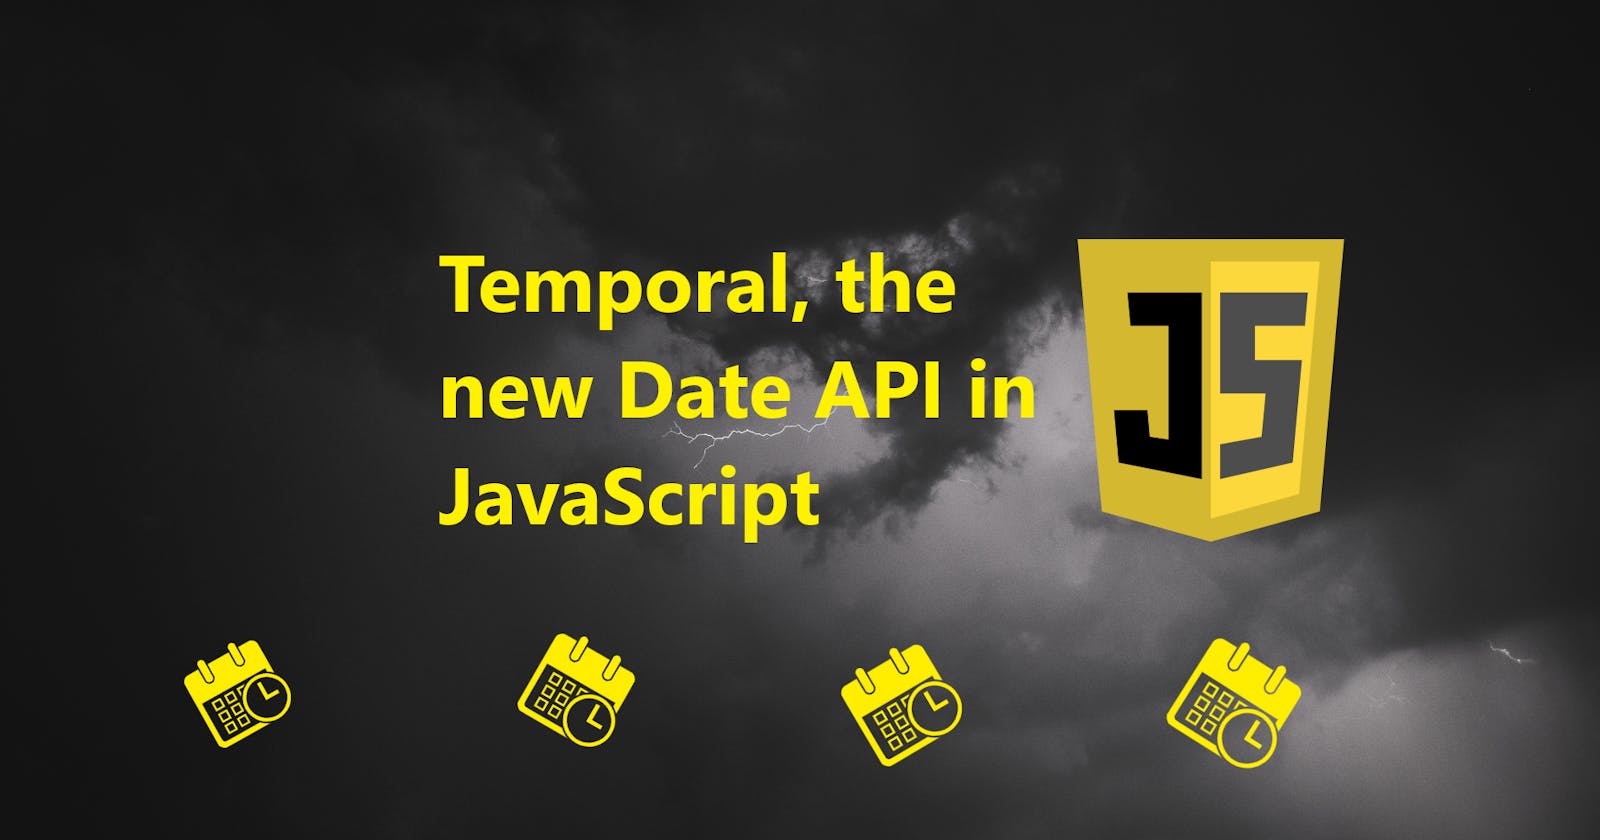 Temporal, the new Date API in JavaScript